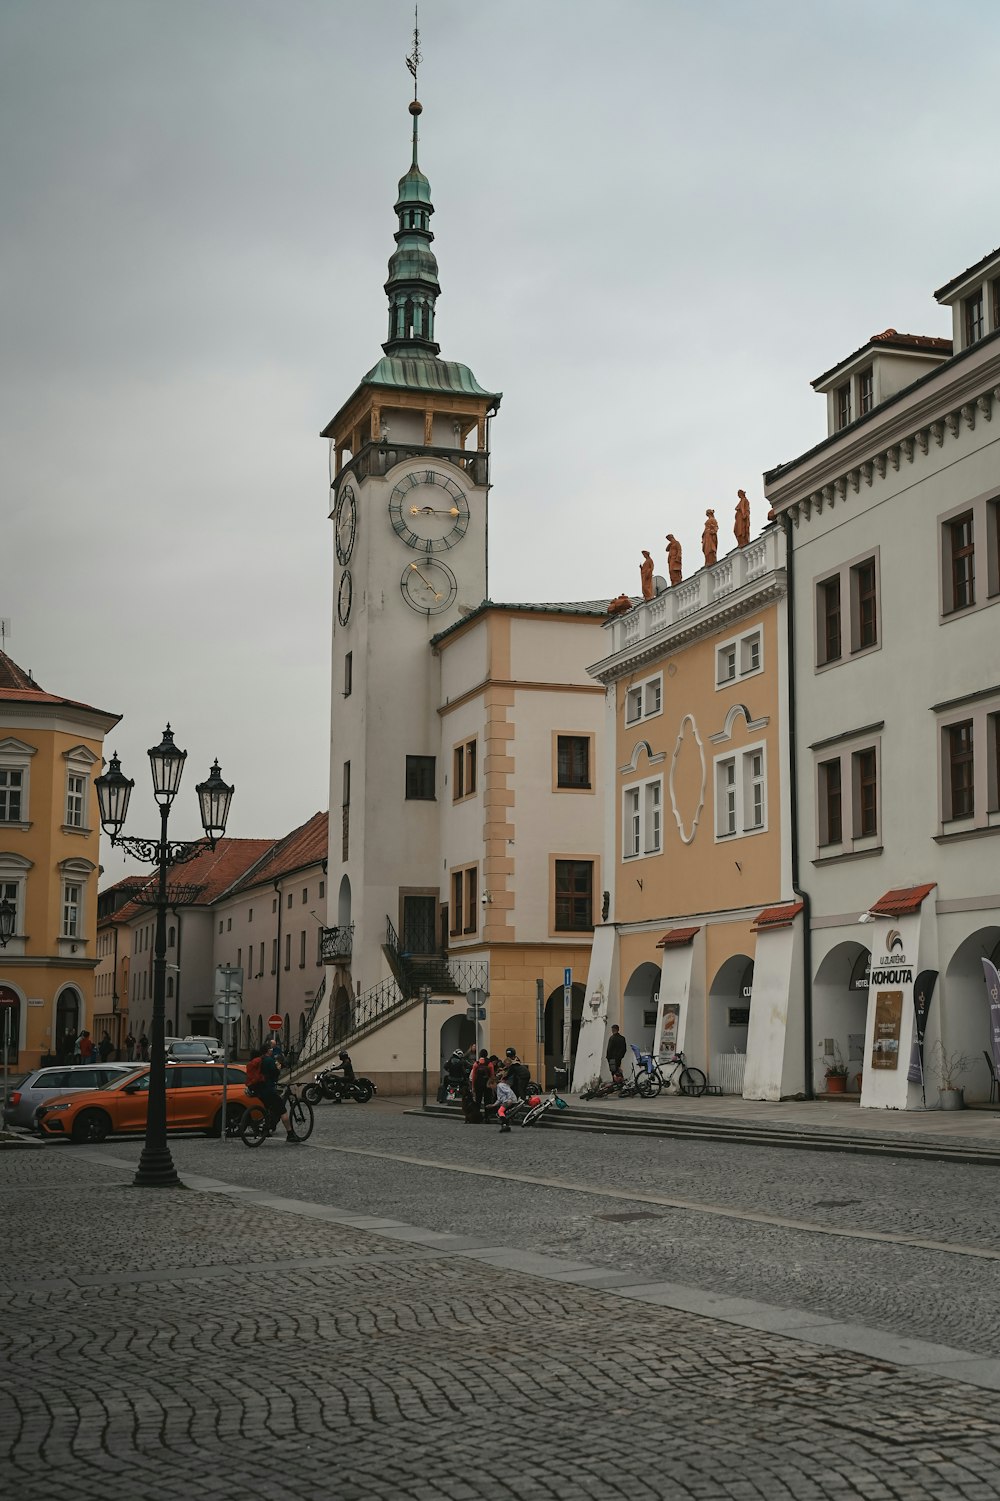 a clock tower in the middle of a cobblestone street